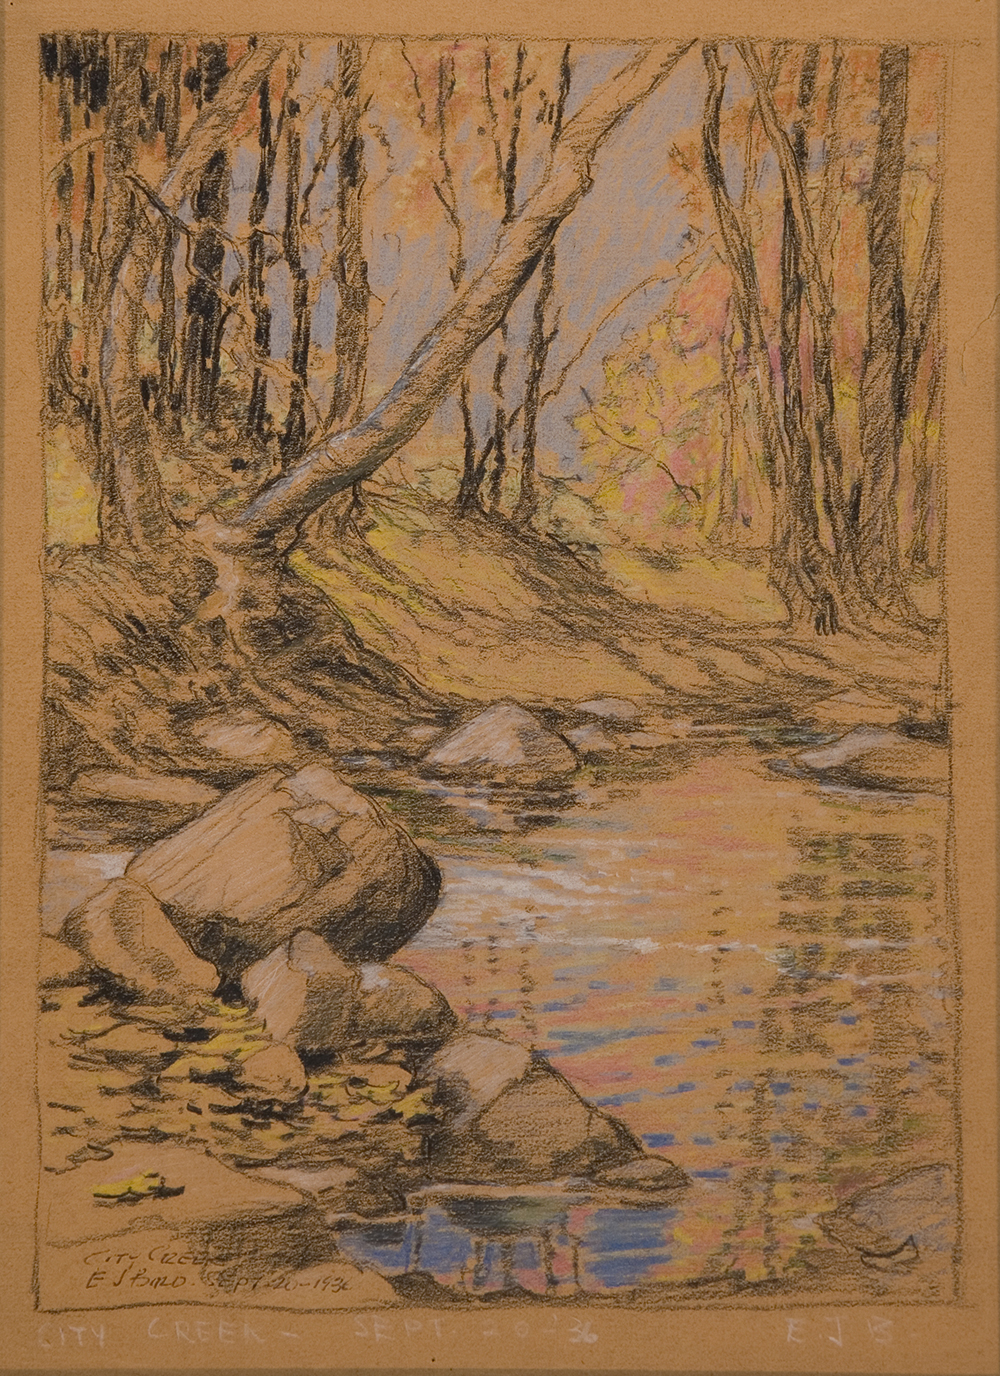 A pastel drawing on tan paper of a creek with a rocky bank and trees in the background